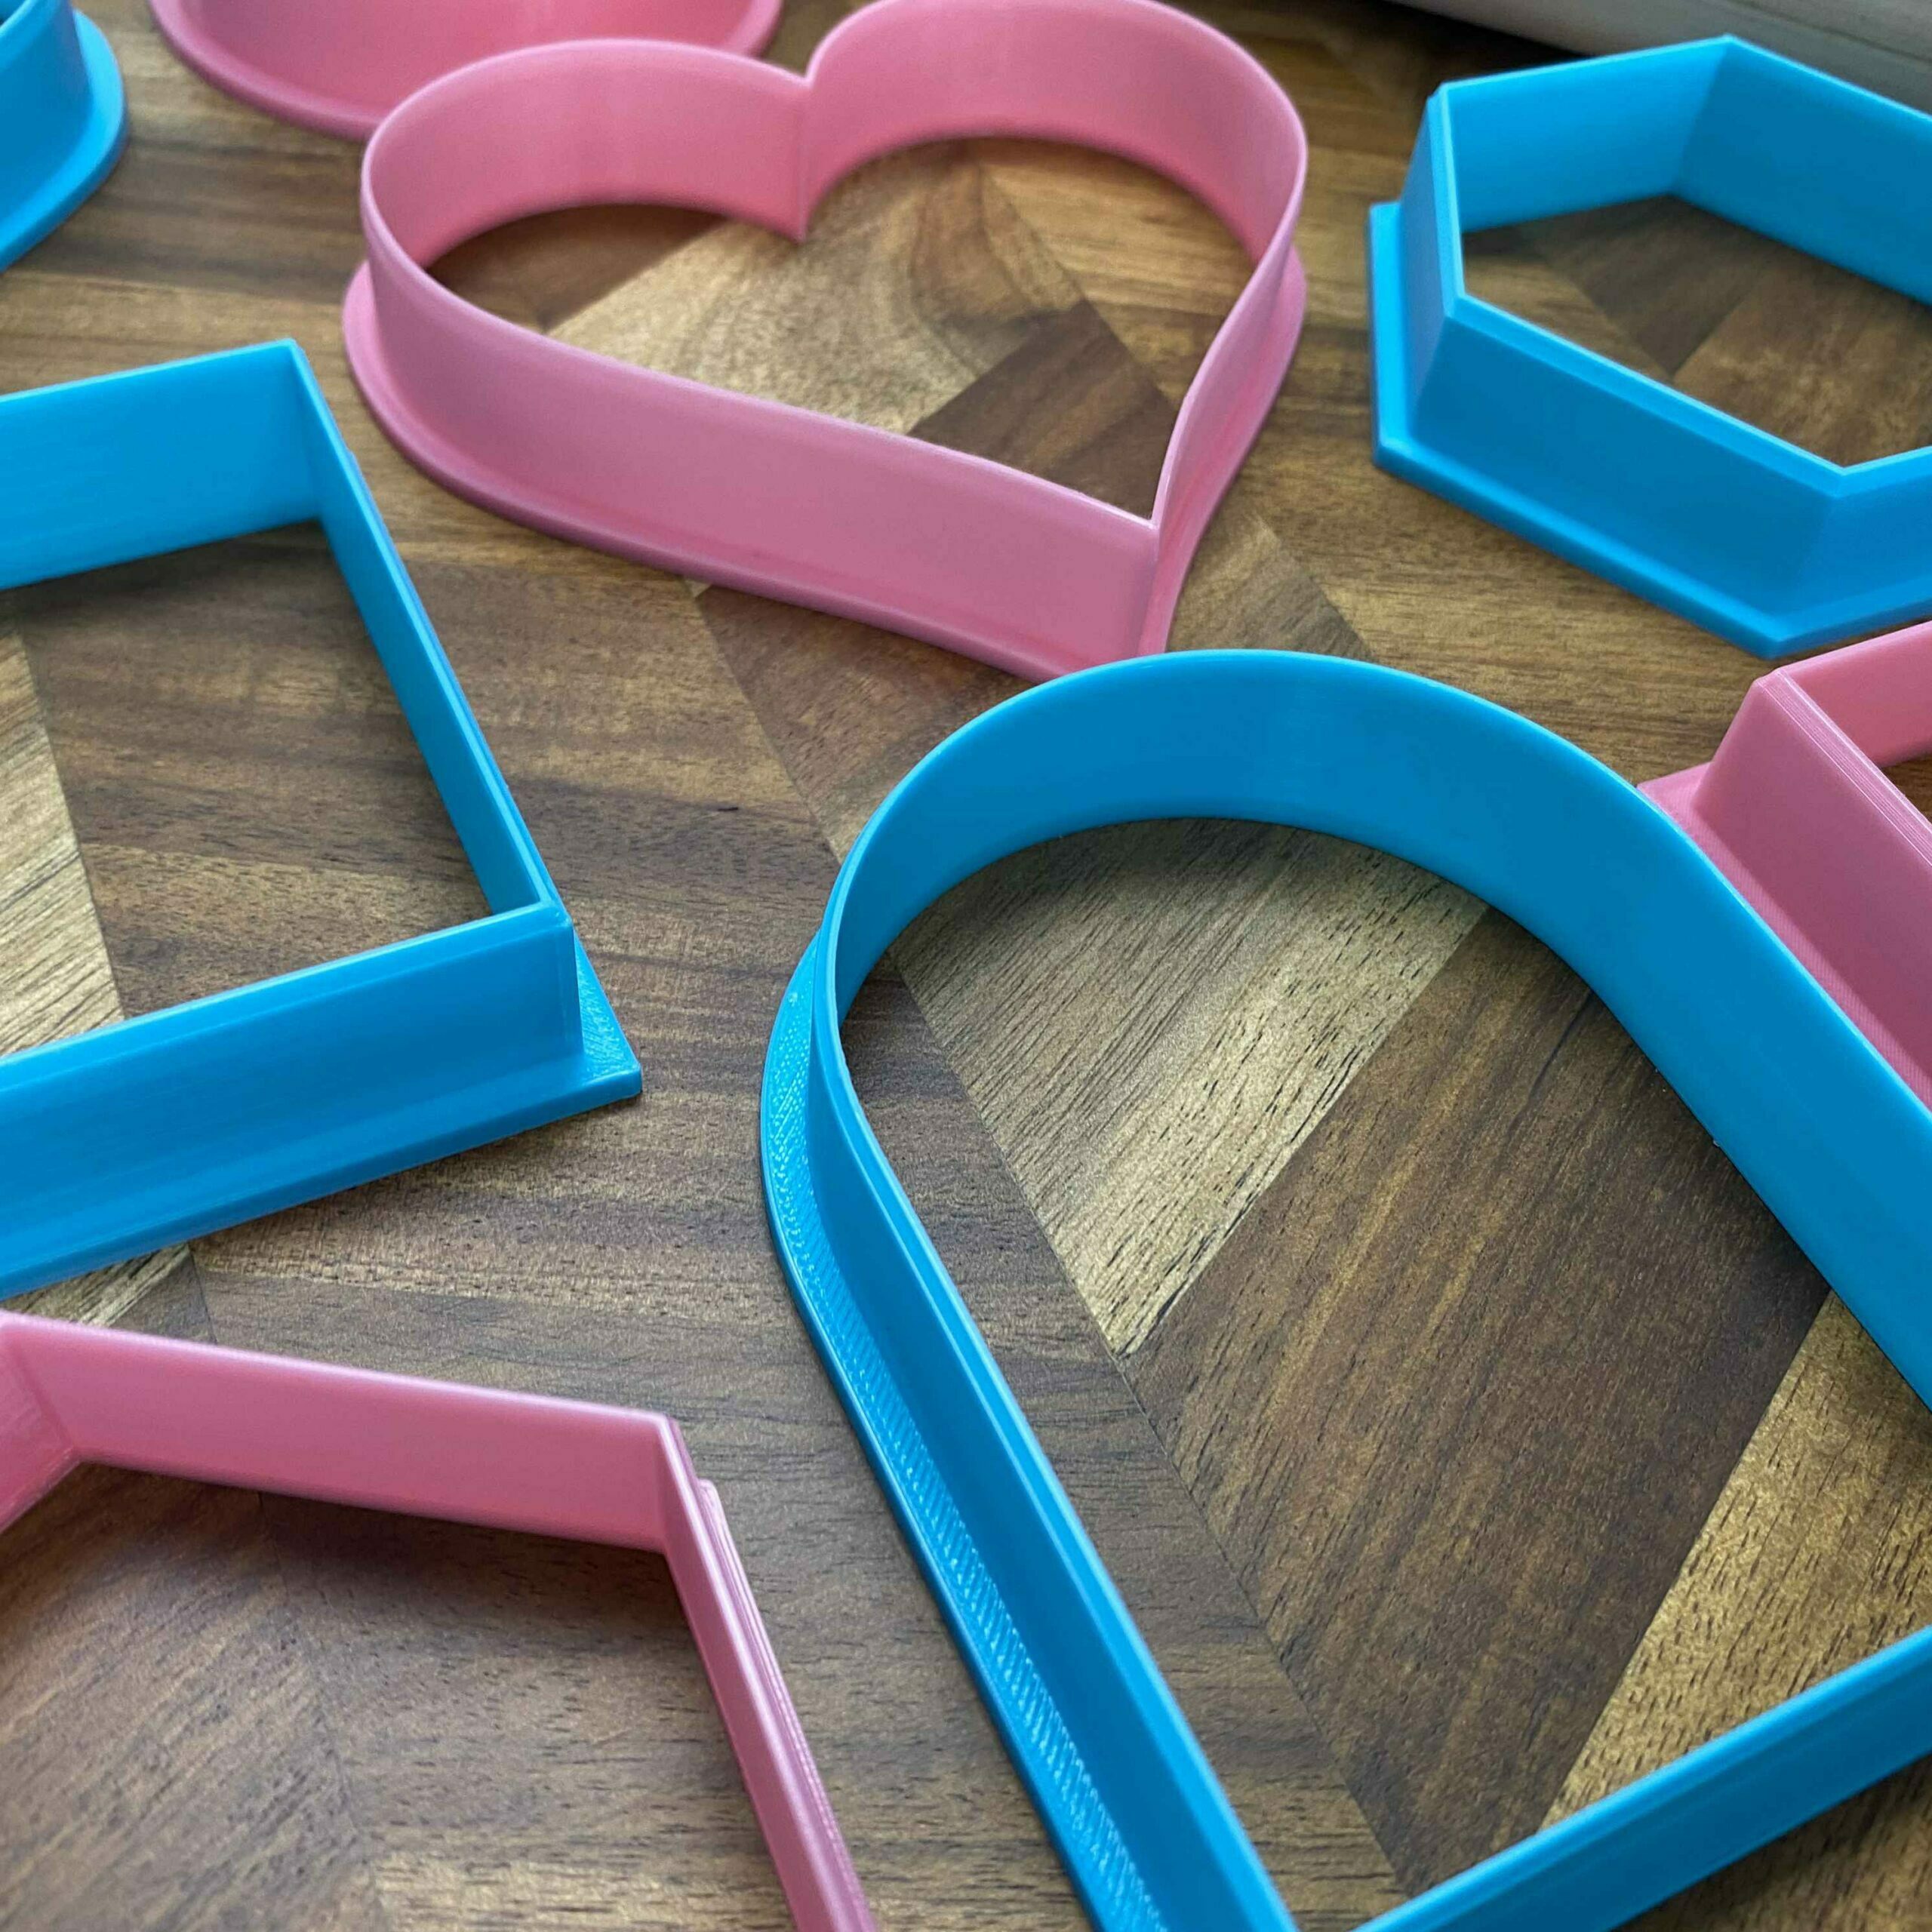 Standard Cookie Cutter Shapes